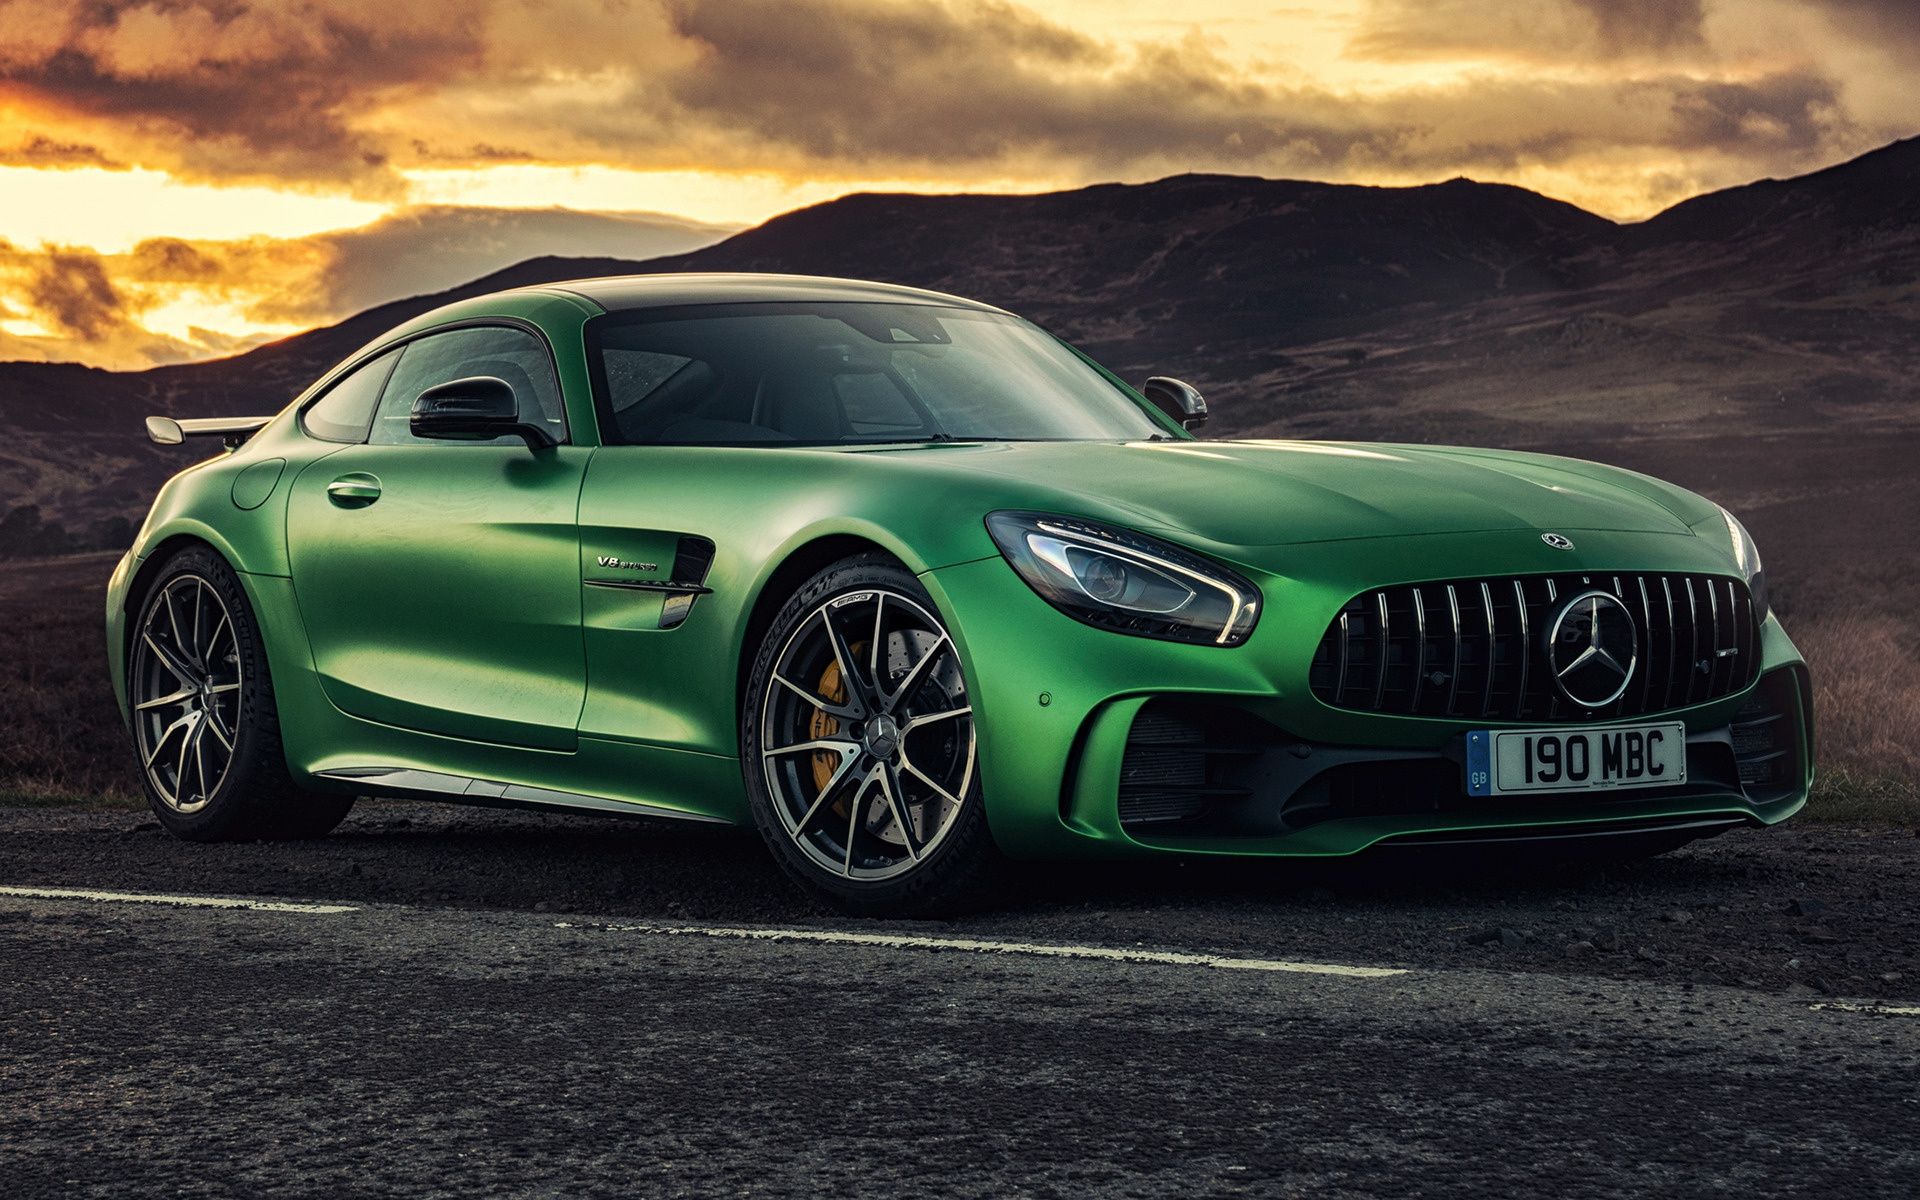 Mercedes AMG GT R (UK) And HD Image